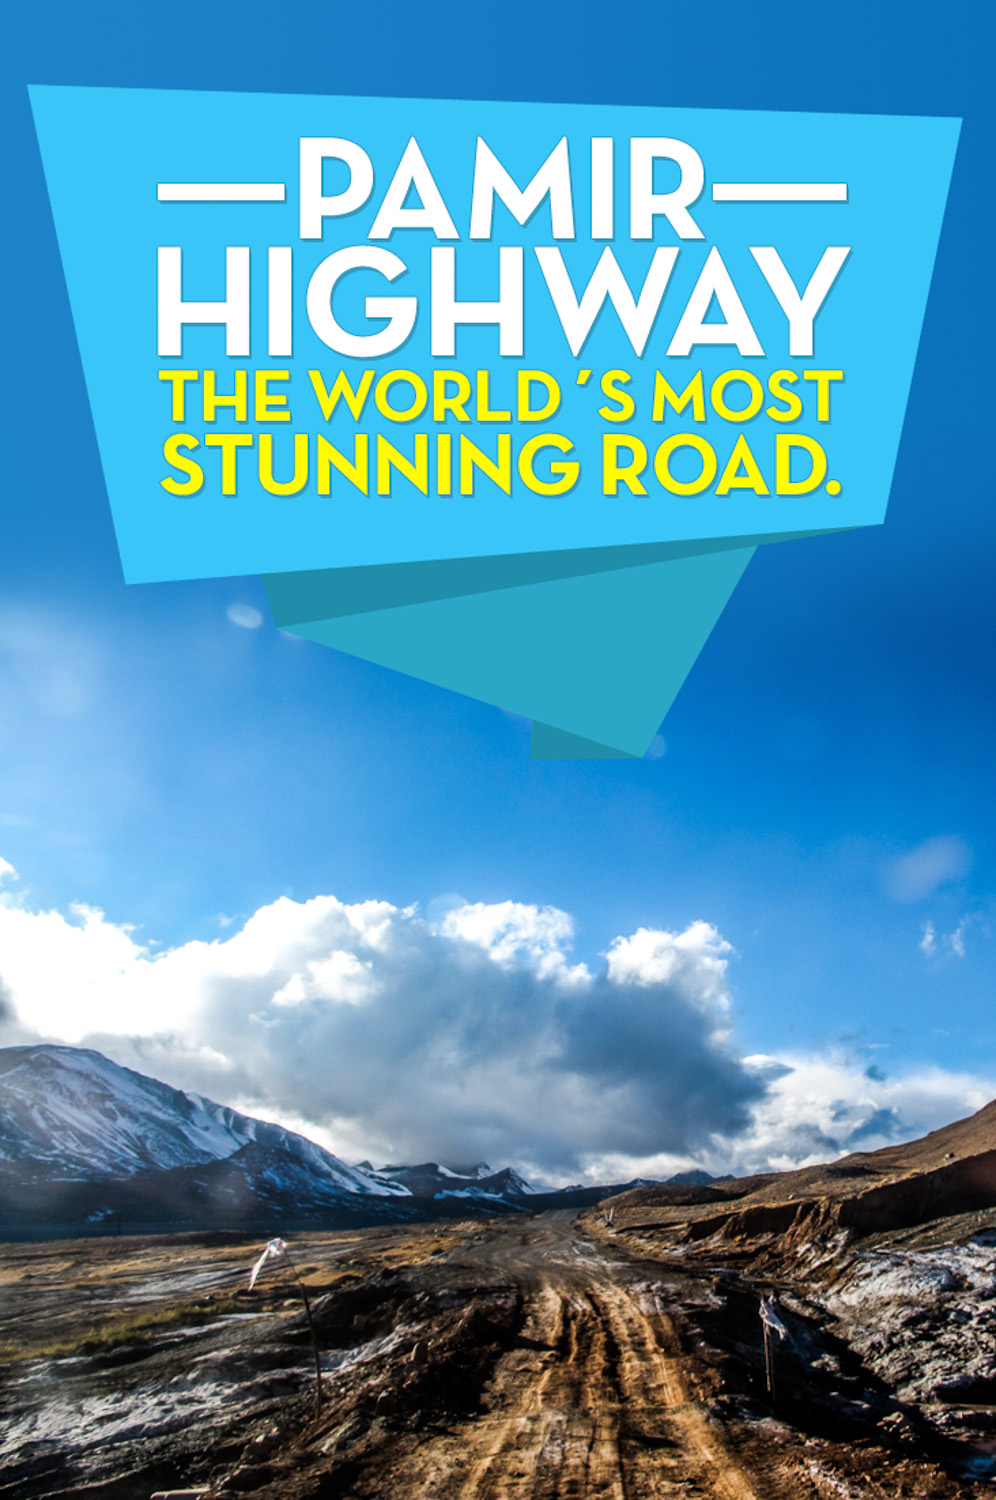 Travel The legendary Pamir highway in Central Asia,